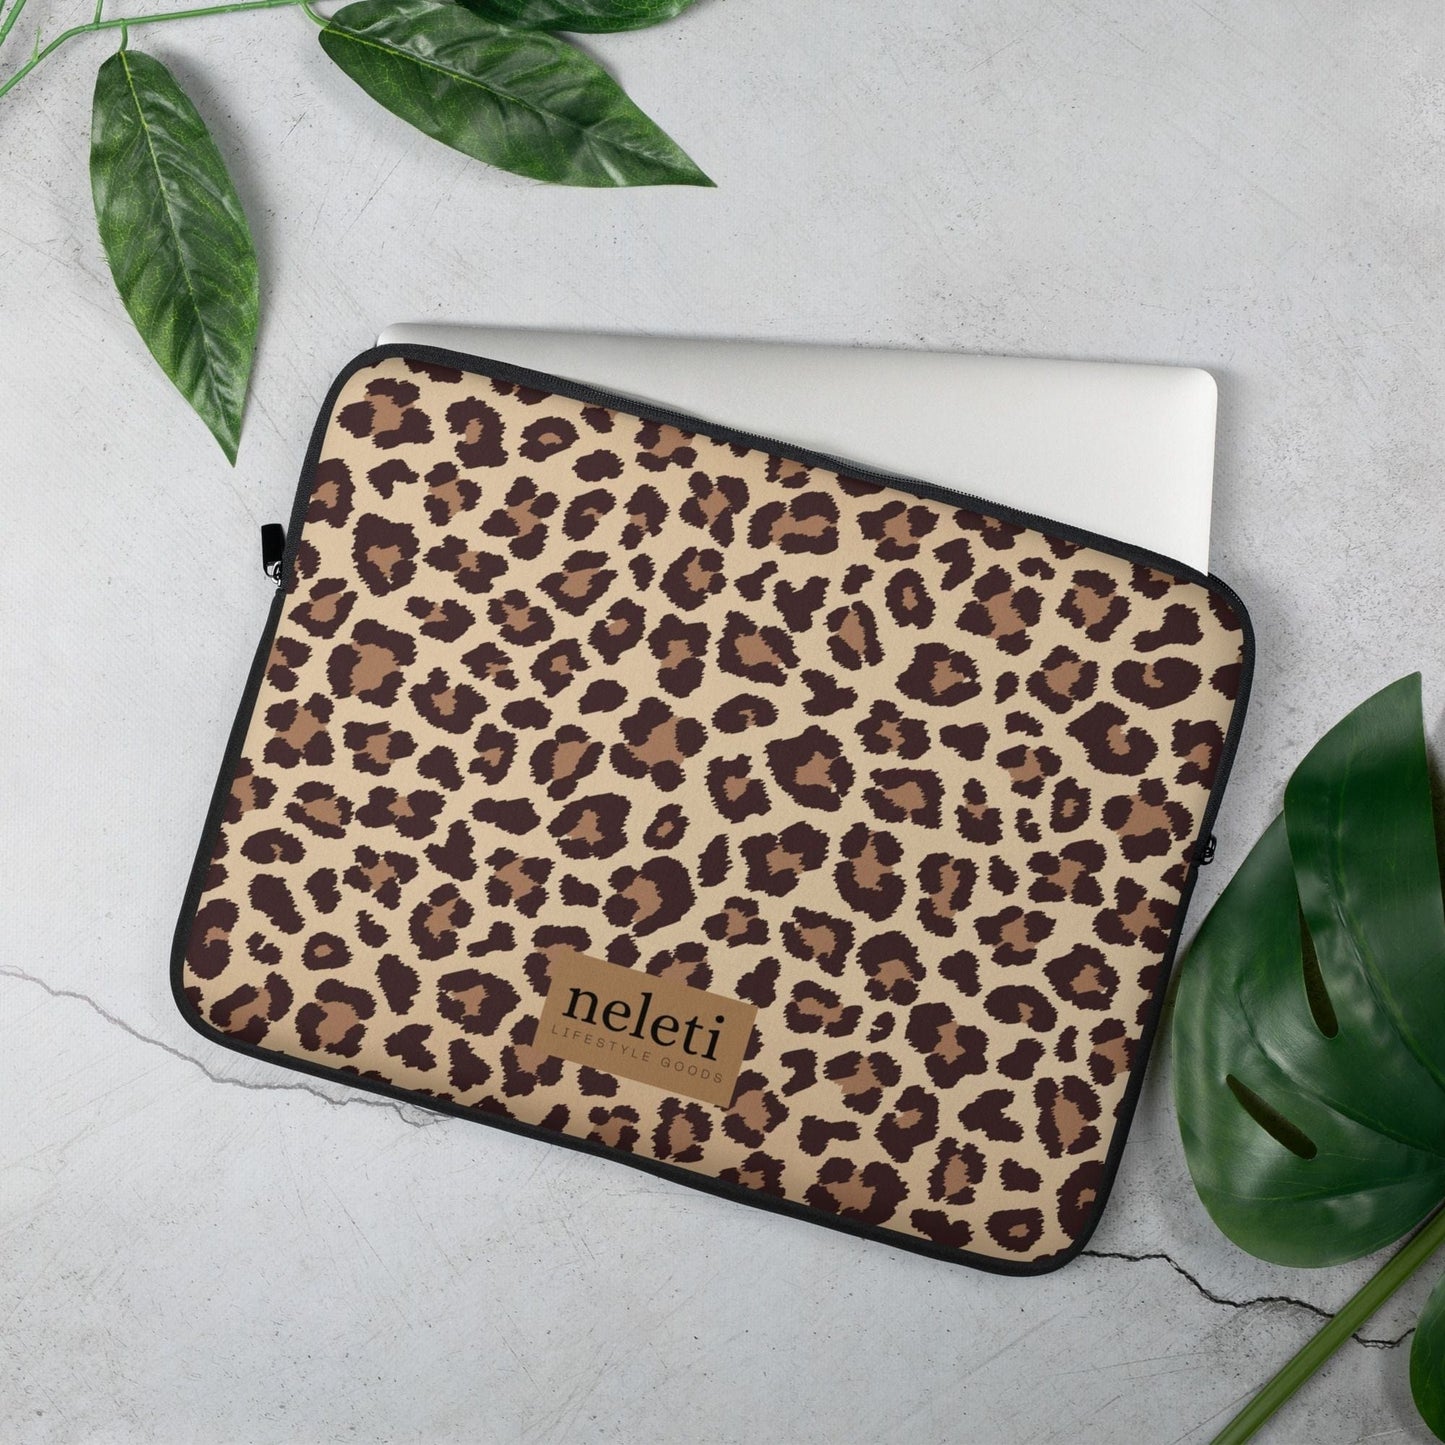 neleti.com-laptop-sleeve-15-inches-with-leopard-print